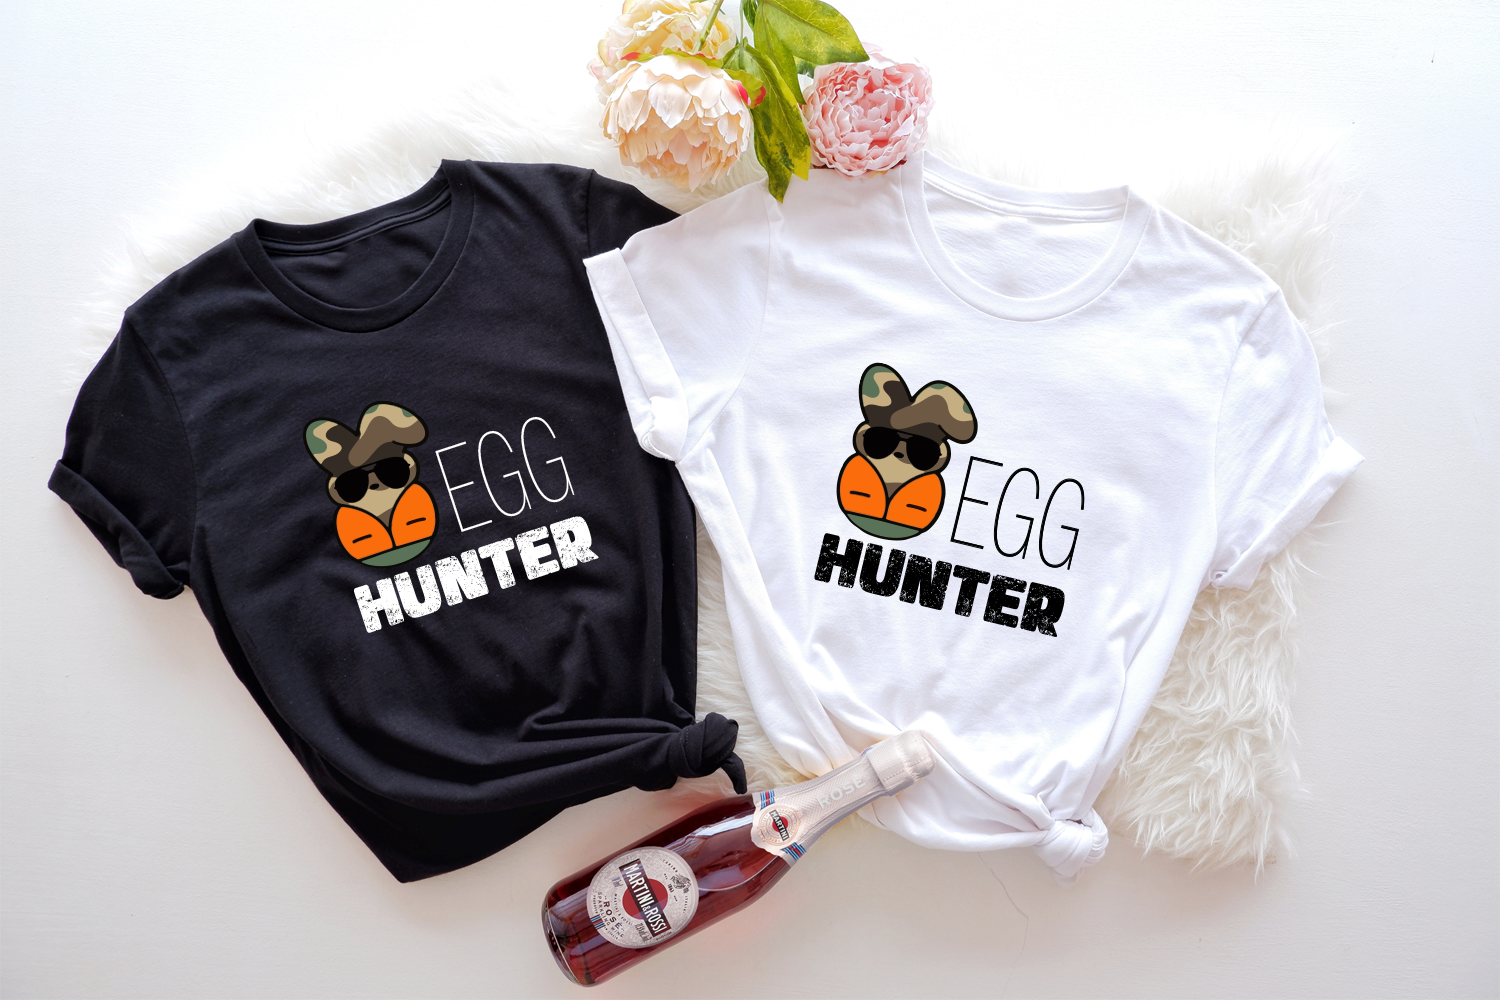 Get your little one ready for the Easter egg hunt Celebrate the joy of Easter in a fun and festive way Dress your child in a comfortable and stylish Easter t-shirt Makes a perfect gift for any toddler or kid who loves Easter